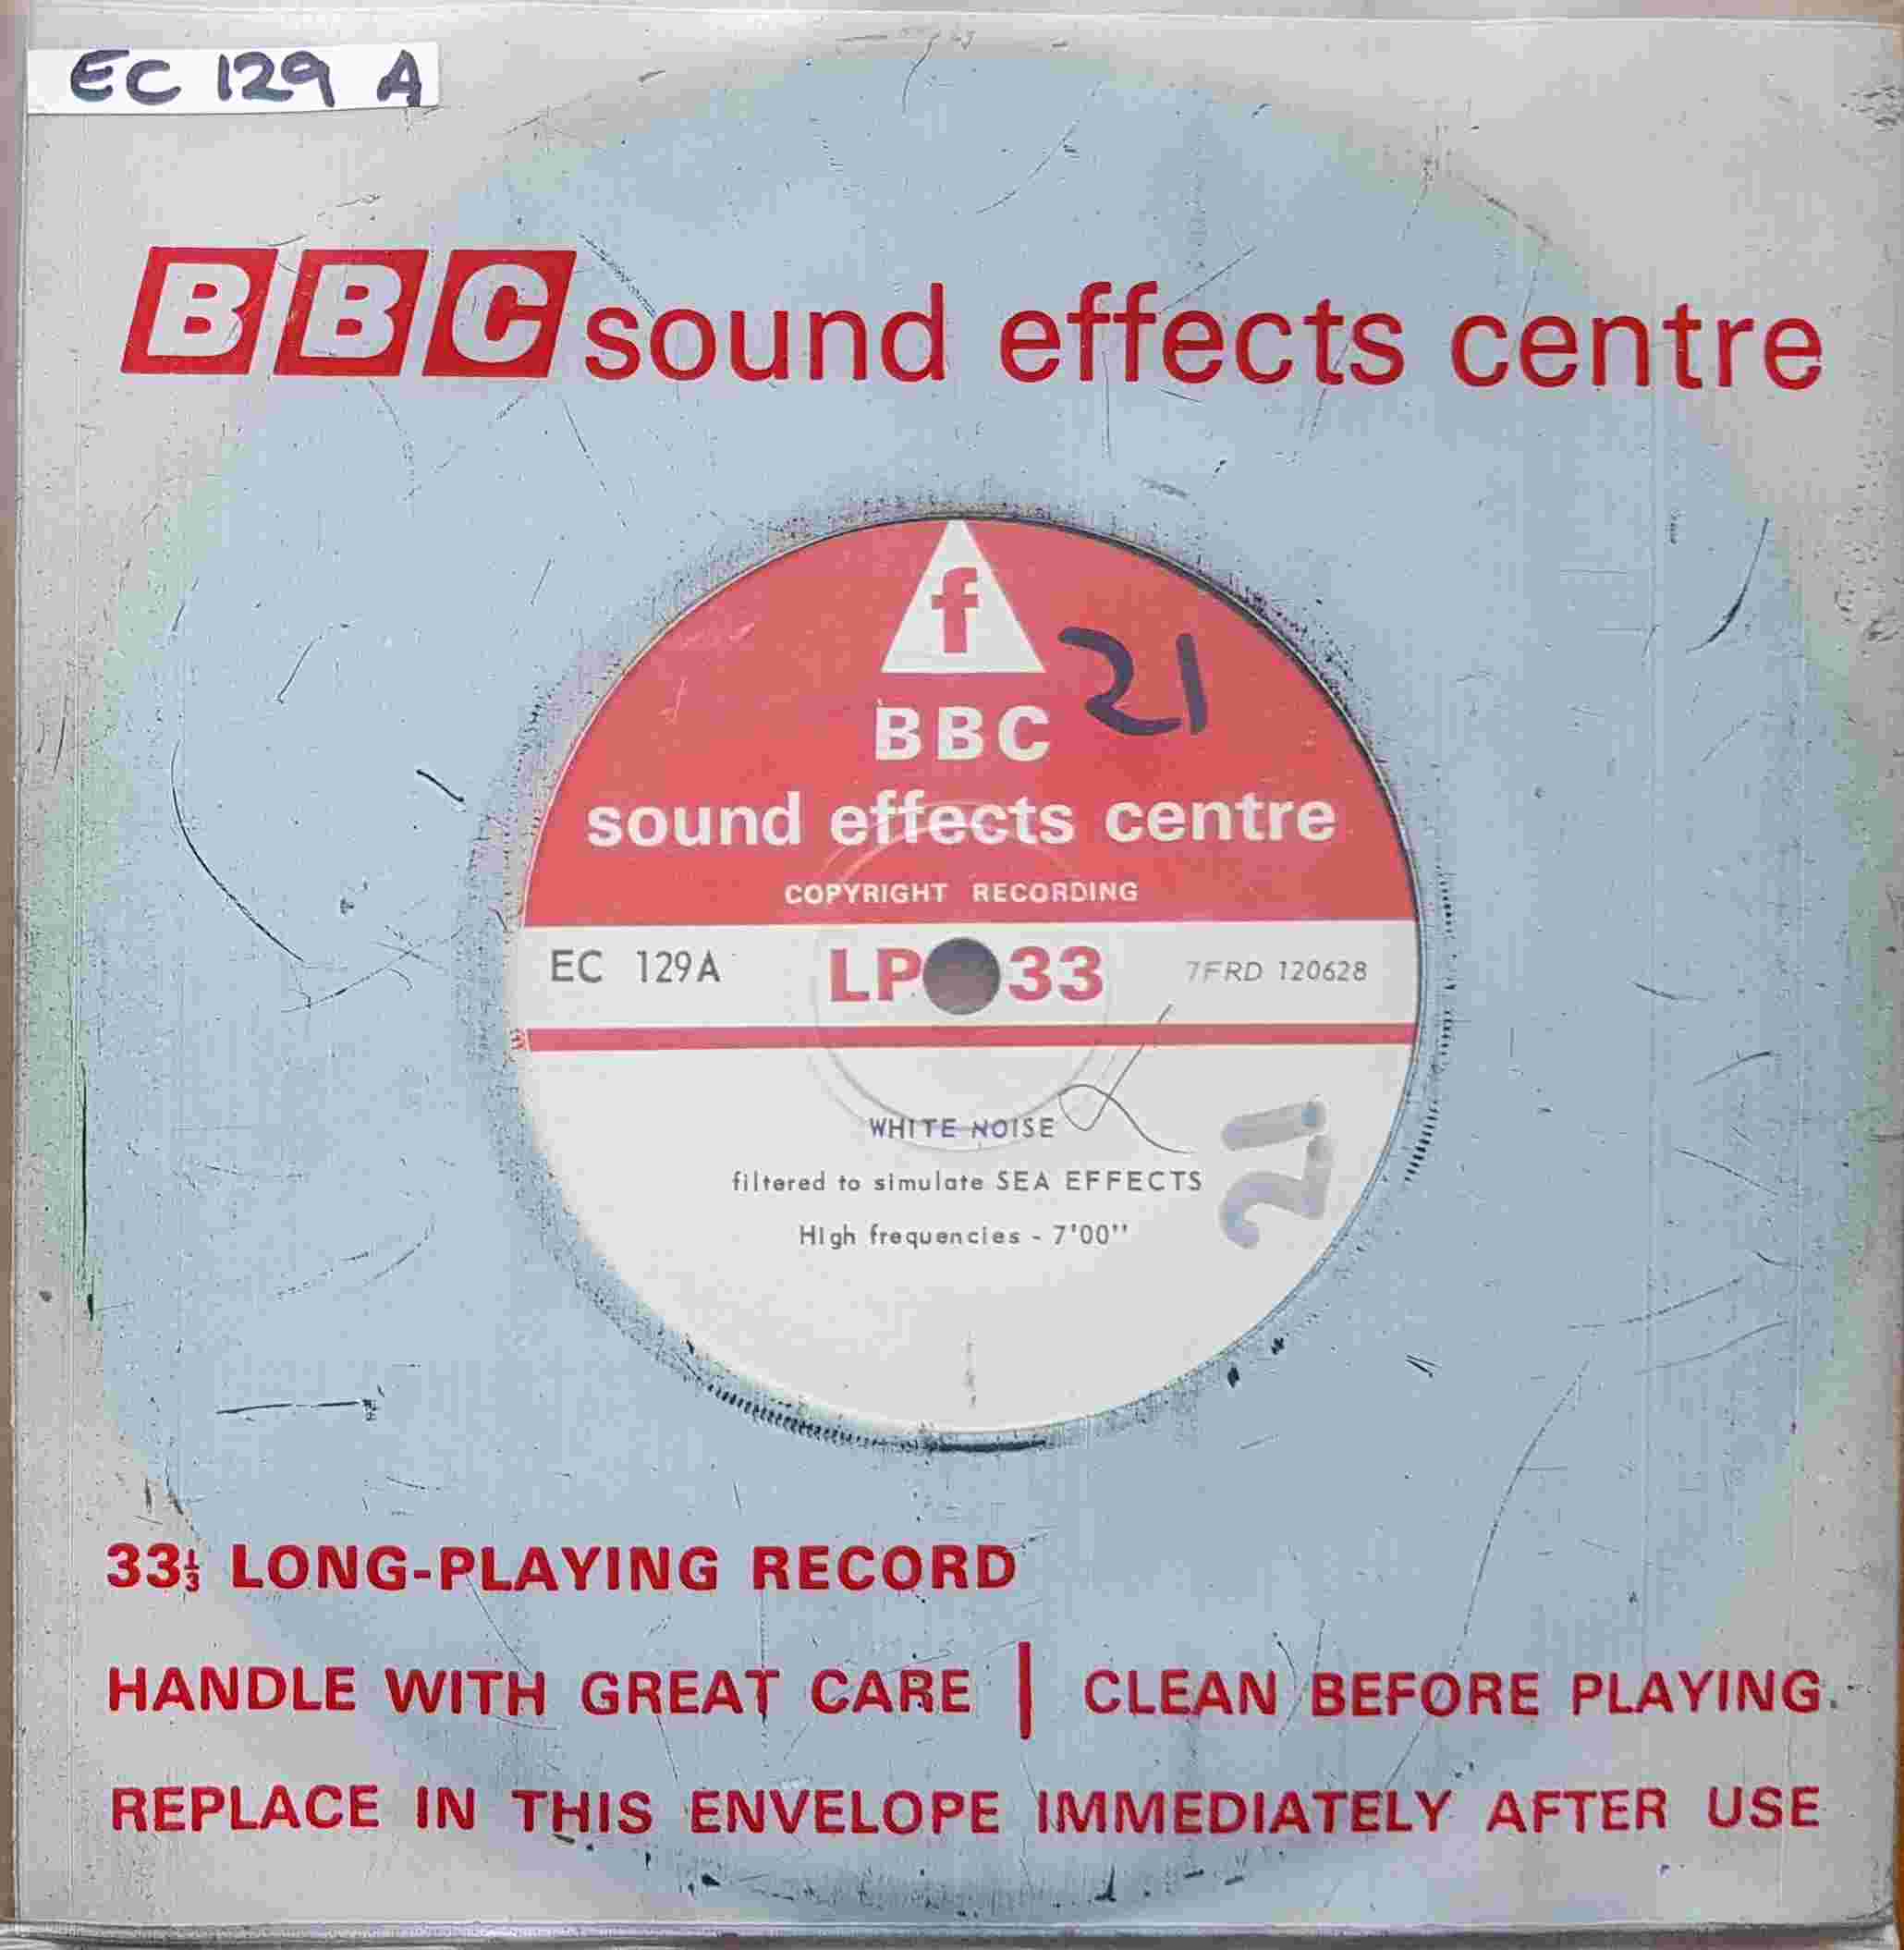 Picture of EC 129A White noise - Filtered to simulate sea effects by artist Not registered from the BBC records and Tapes library